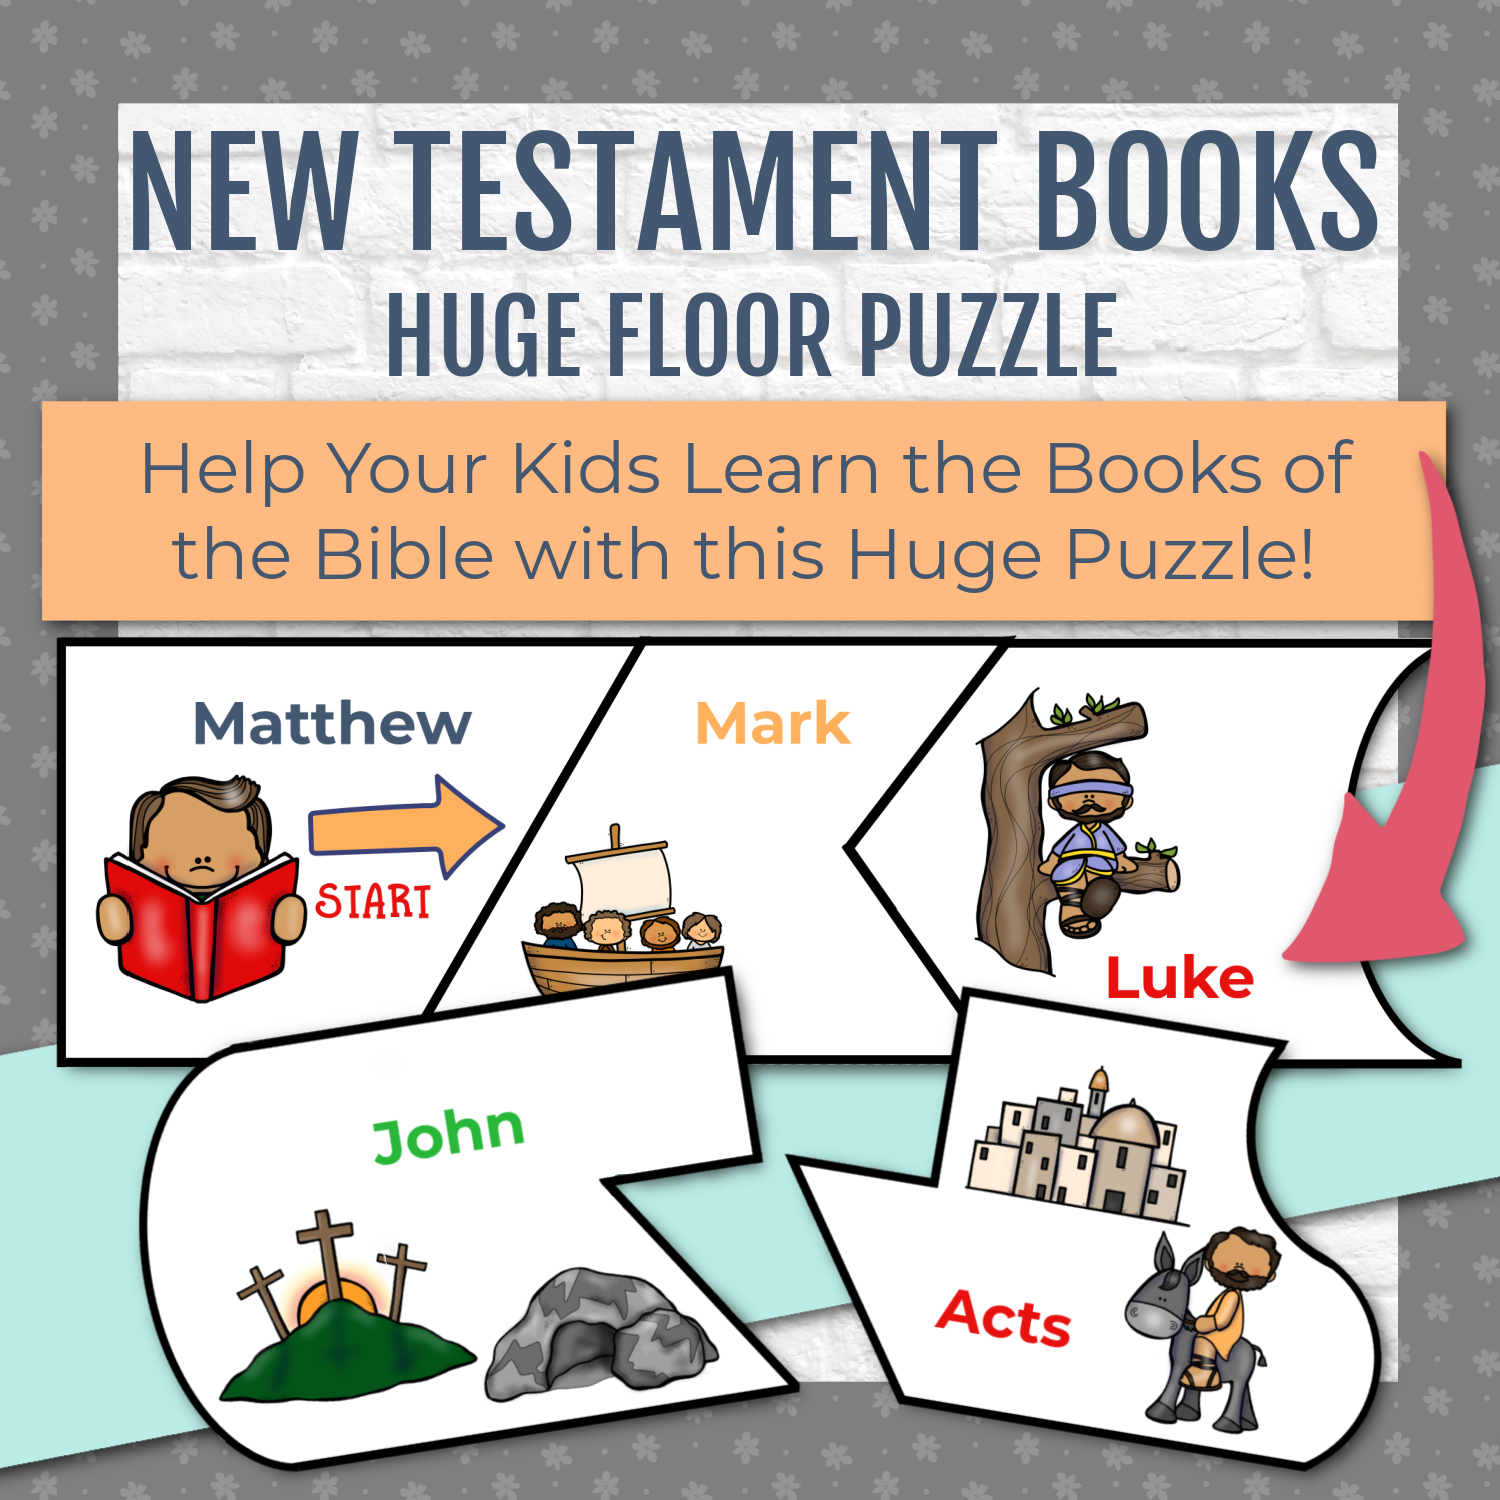 Books of the Bible New Testament Games Bundle